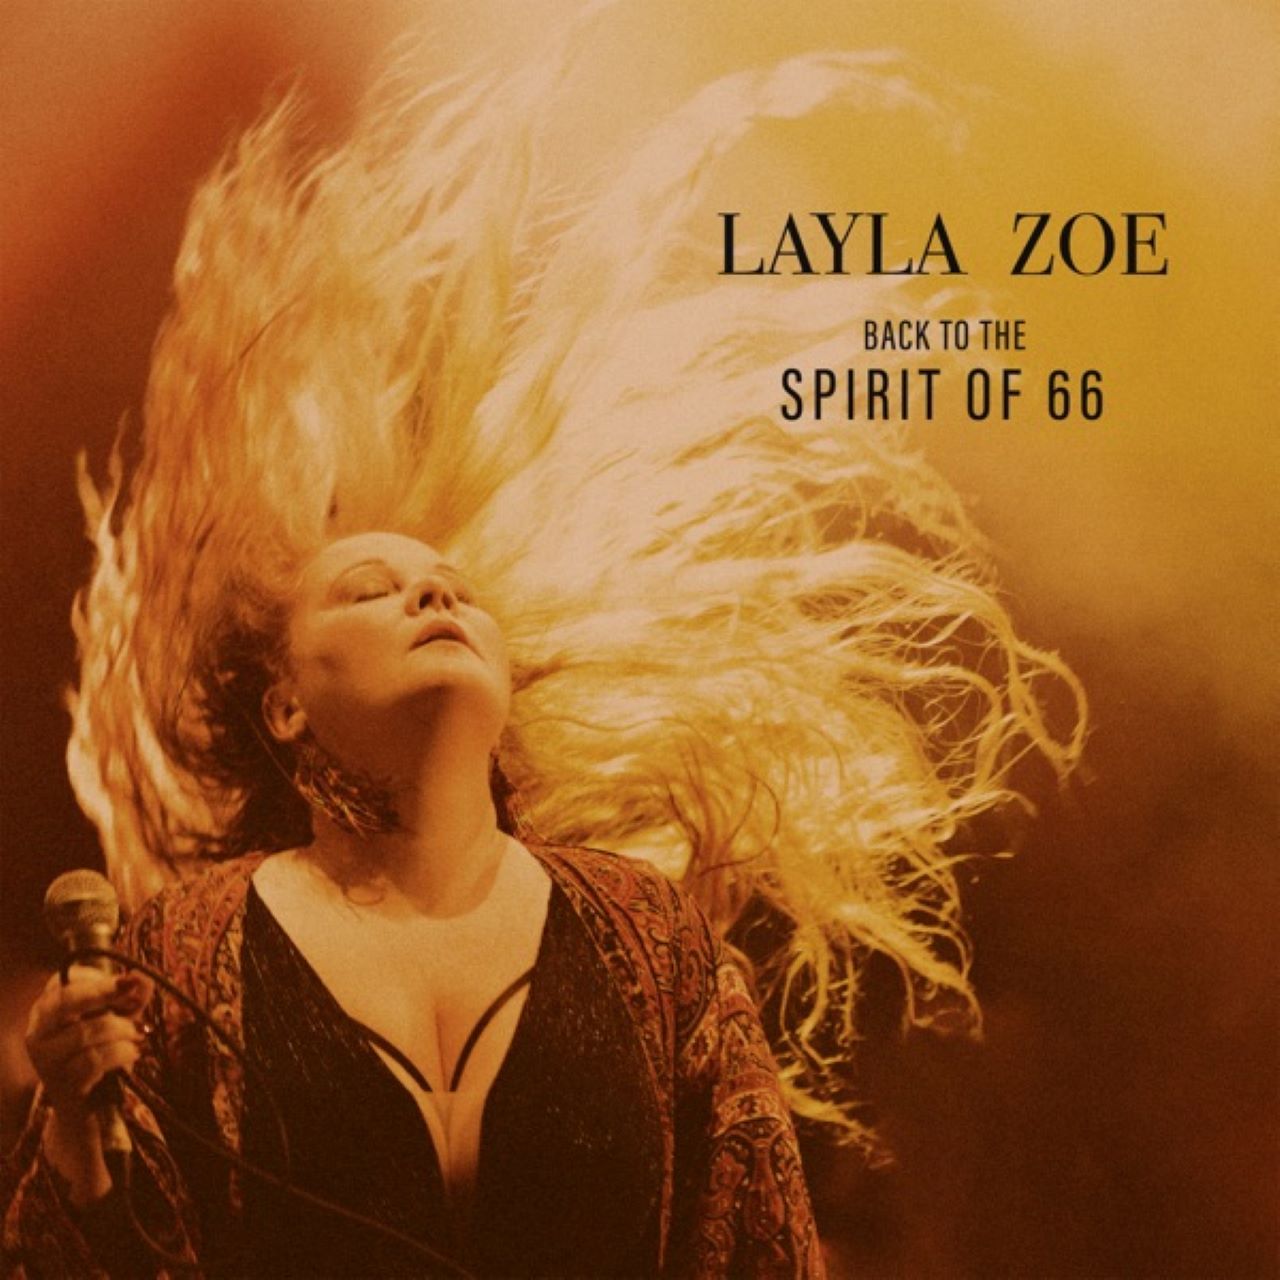 Layla Zoe - Back To The Spirit Of 66 news